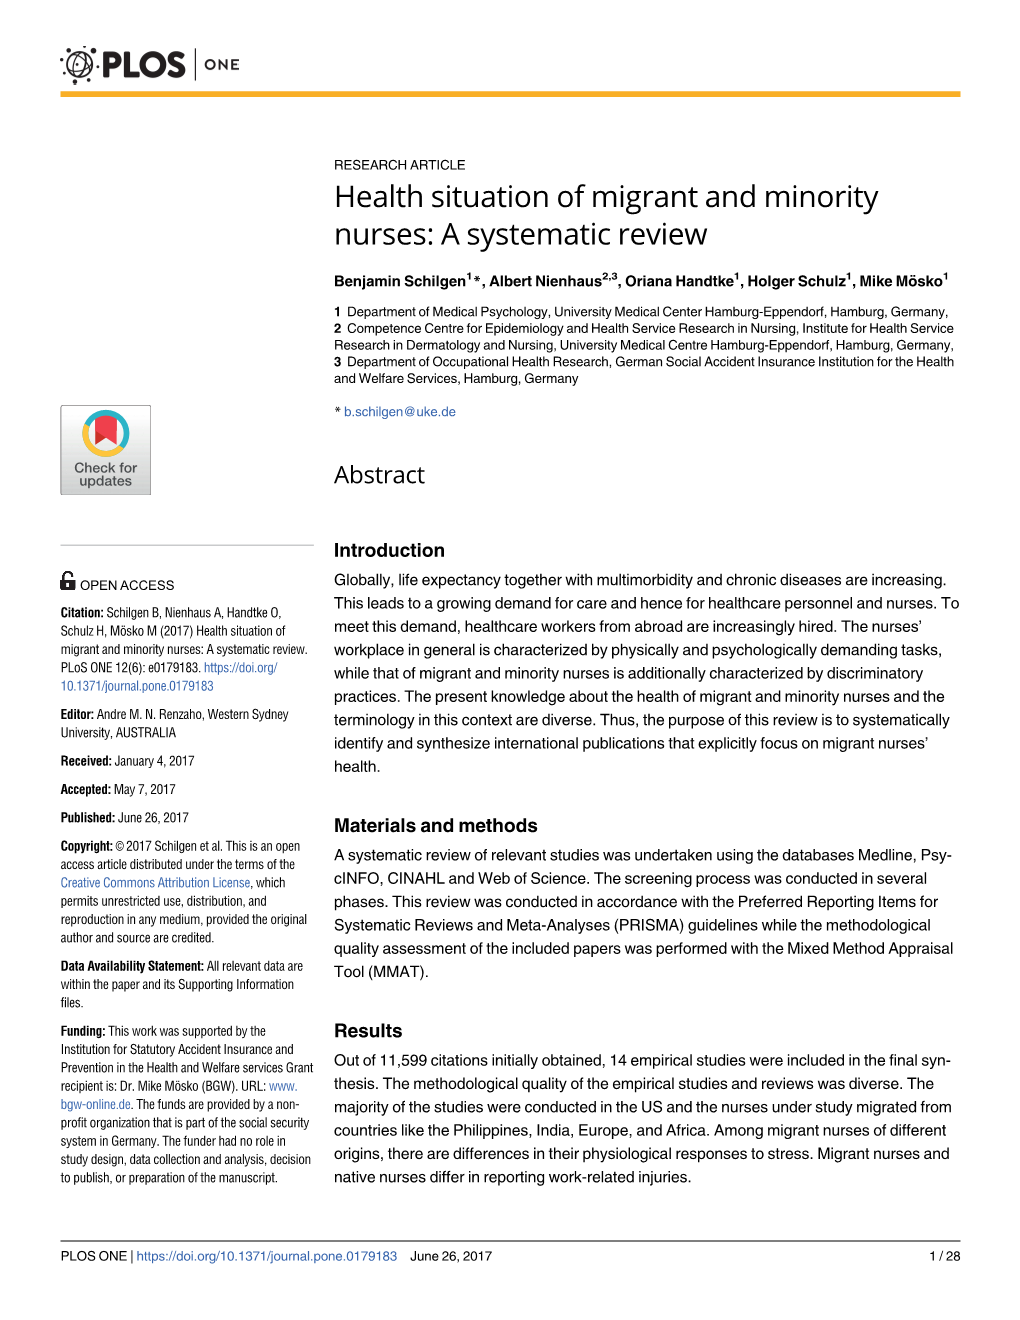 Health Situation of Migrant and Minority Nurses: a Systematic Review